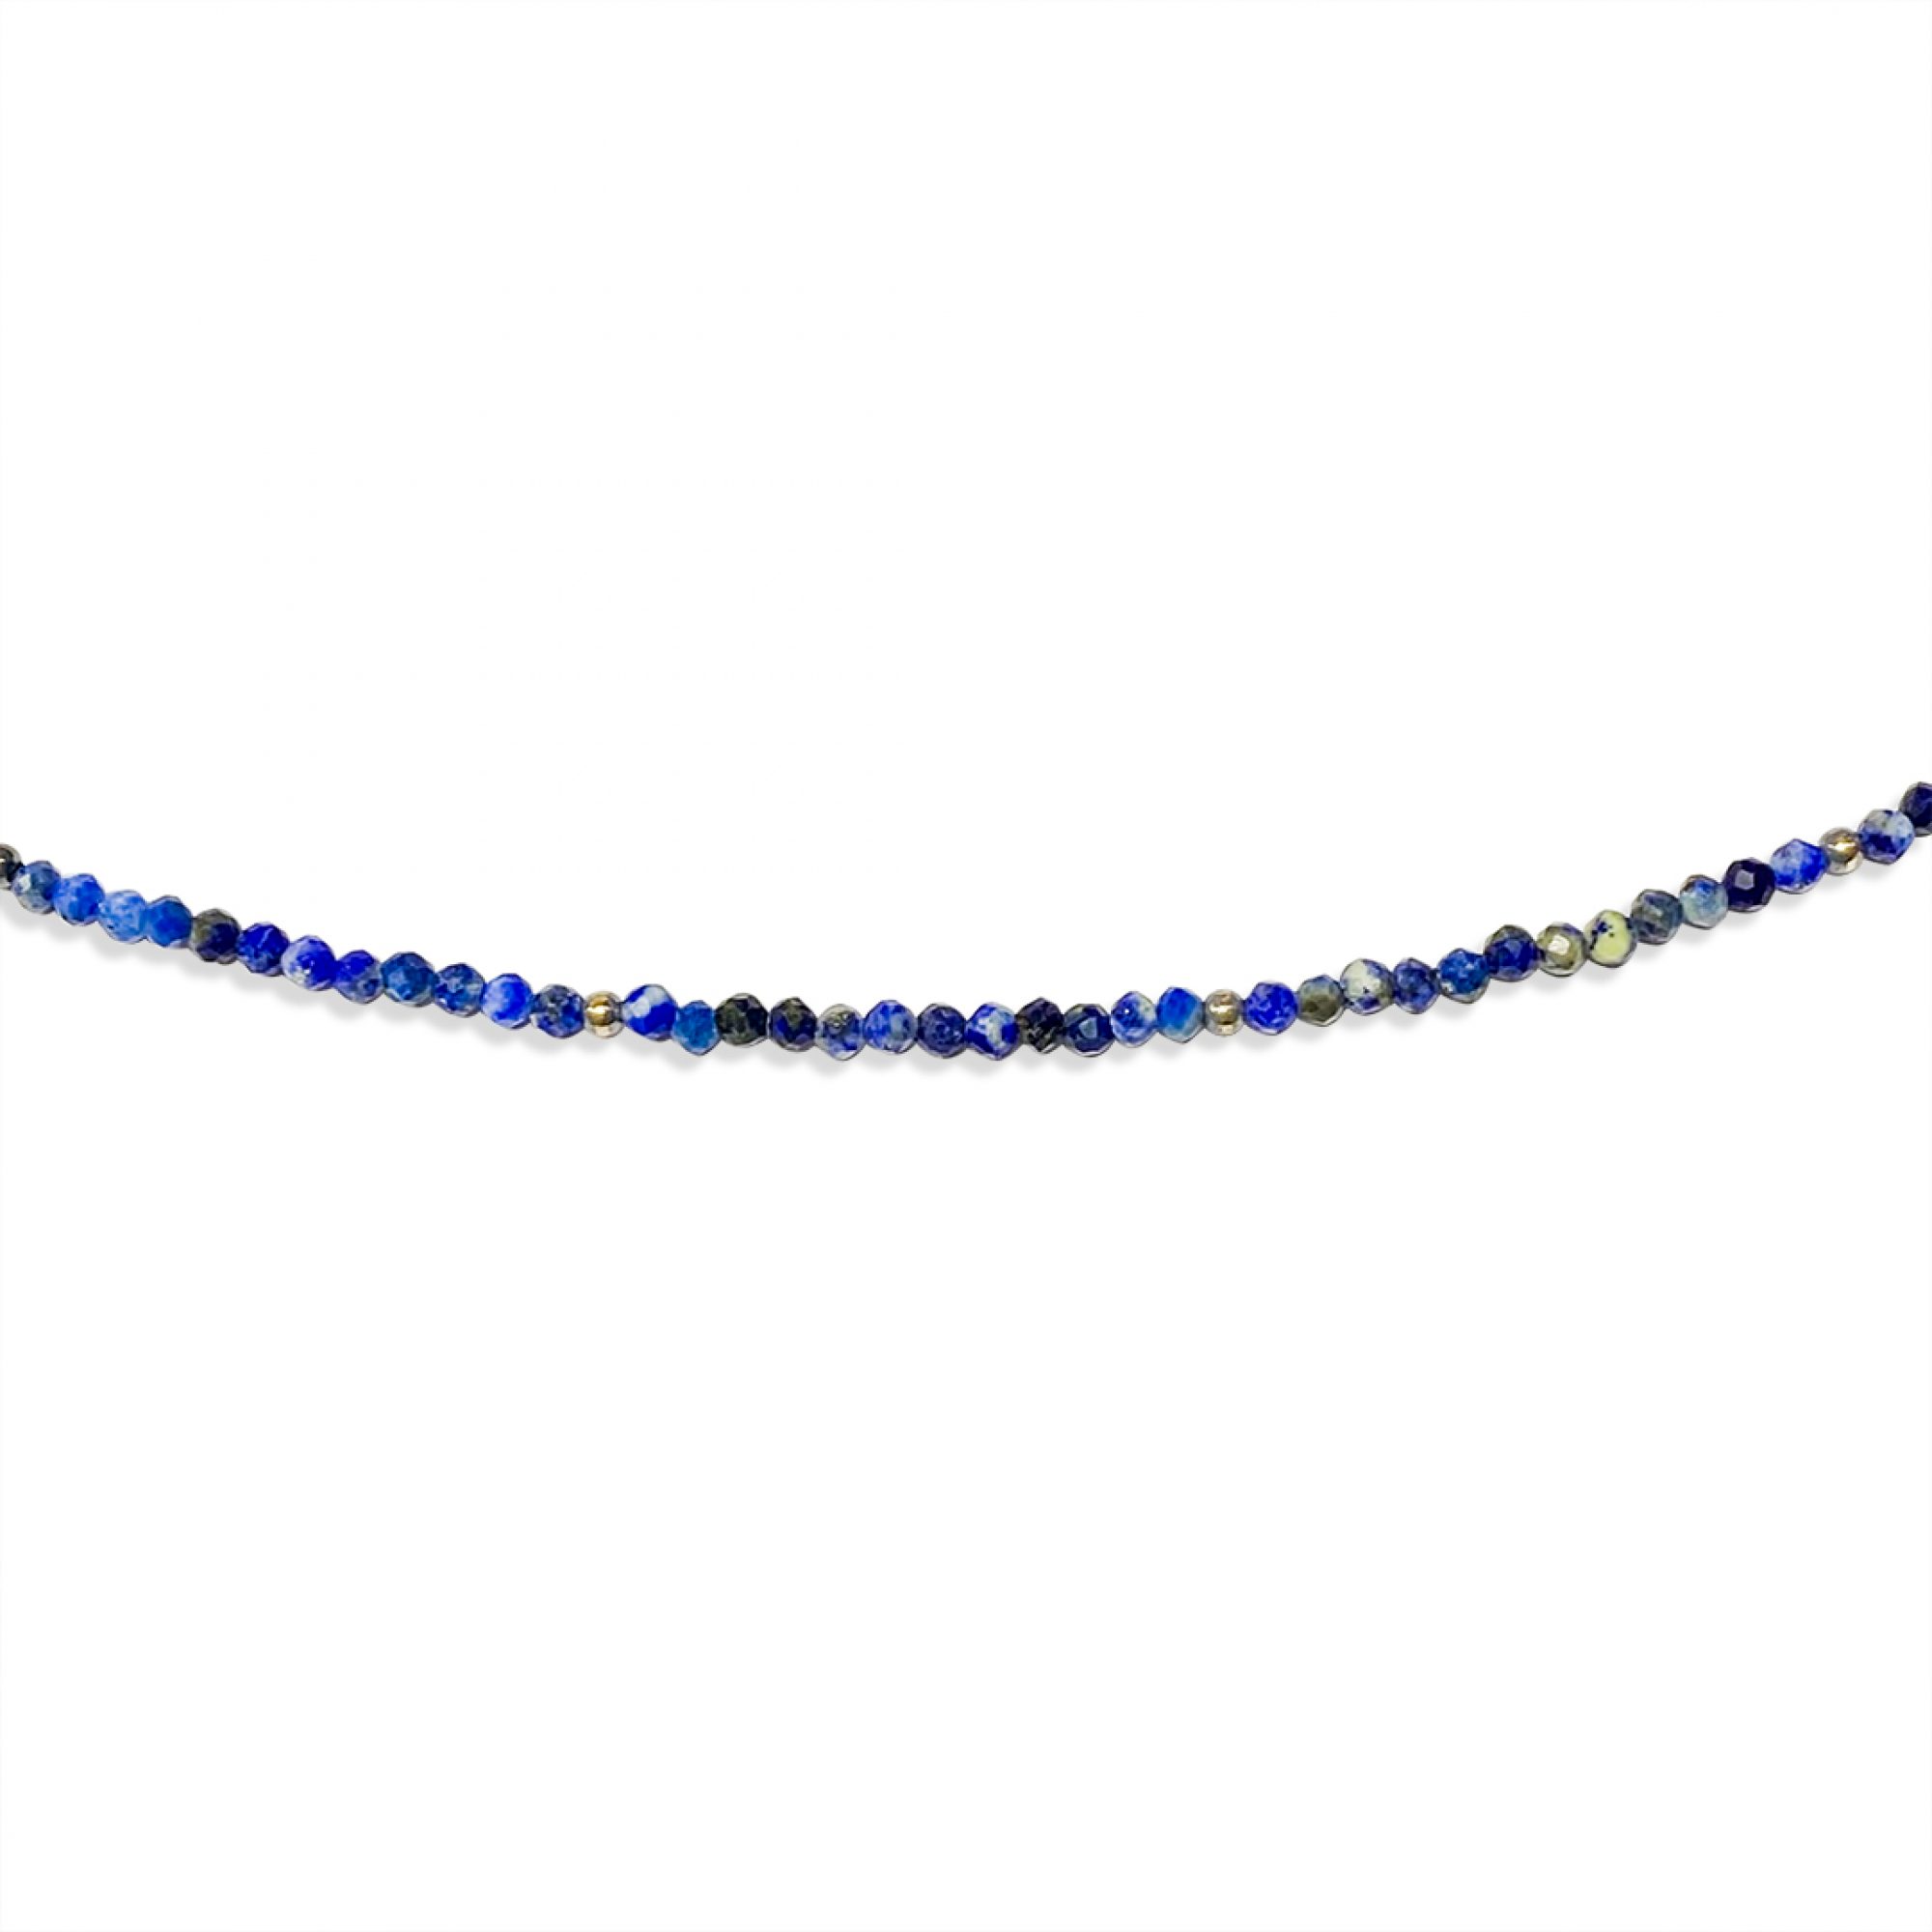 Gold plated anklet with lapis lazuli beads